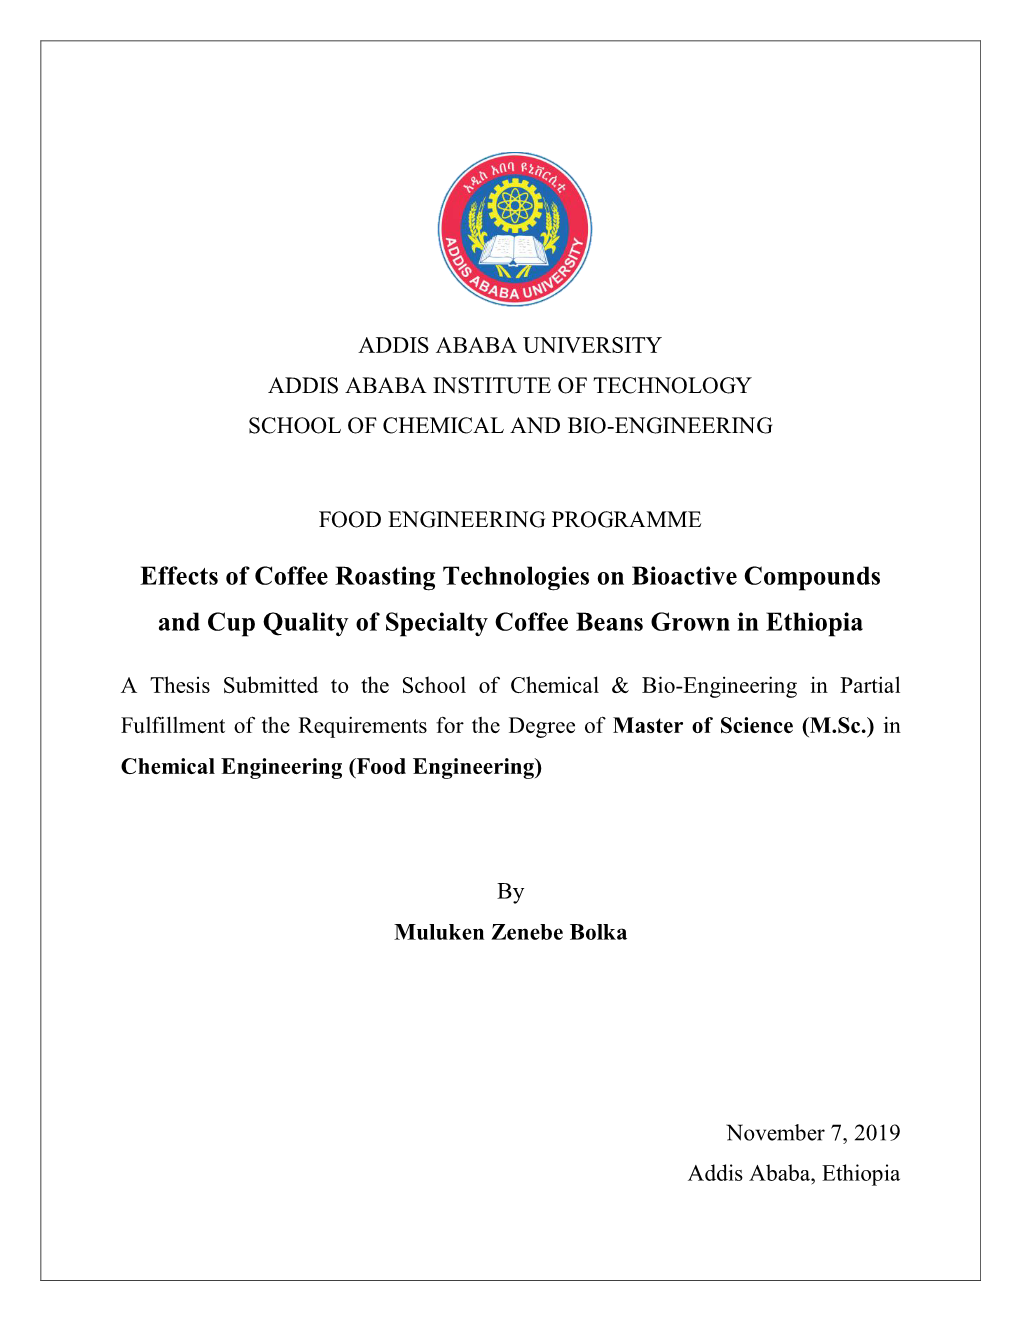 Effects of Coffee Roasting Technologies on Bioactive Compounds and Cup Quality of Specialty Coffee Beans Grown in Ethiopia